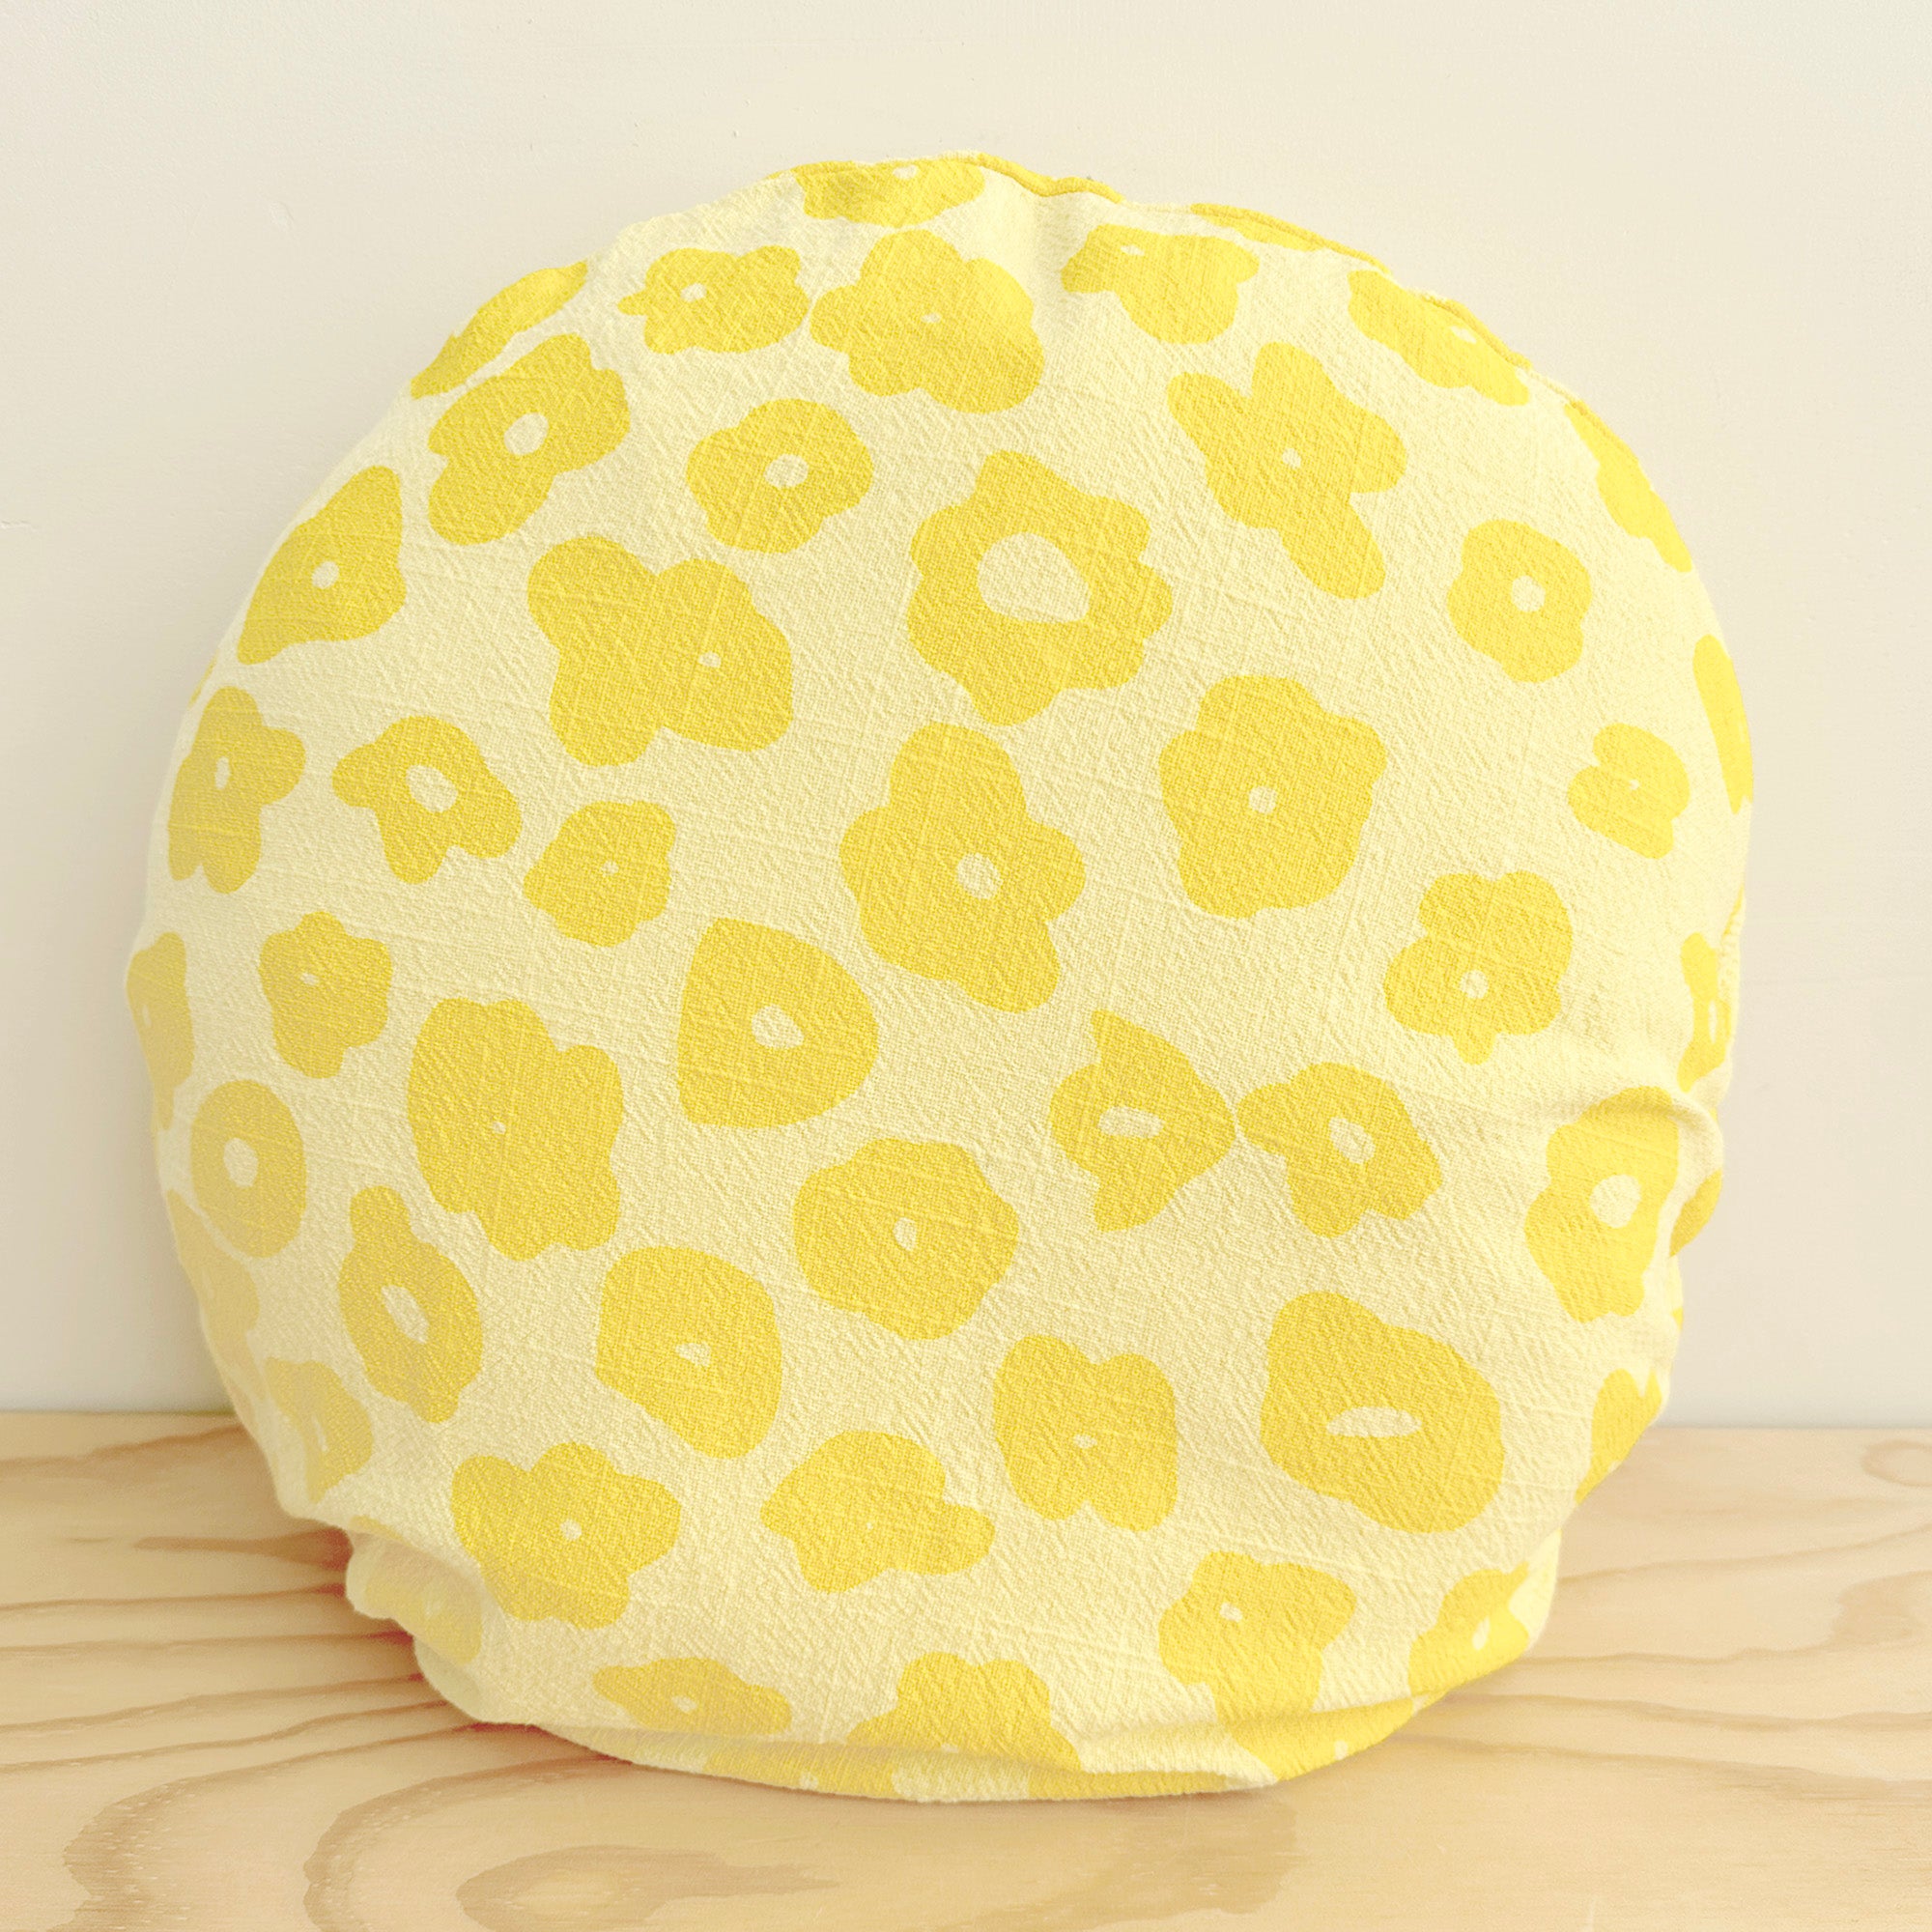 The Round Throw Pillow - Celeste in Yellow and Sunny Days